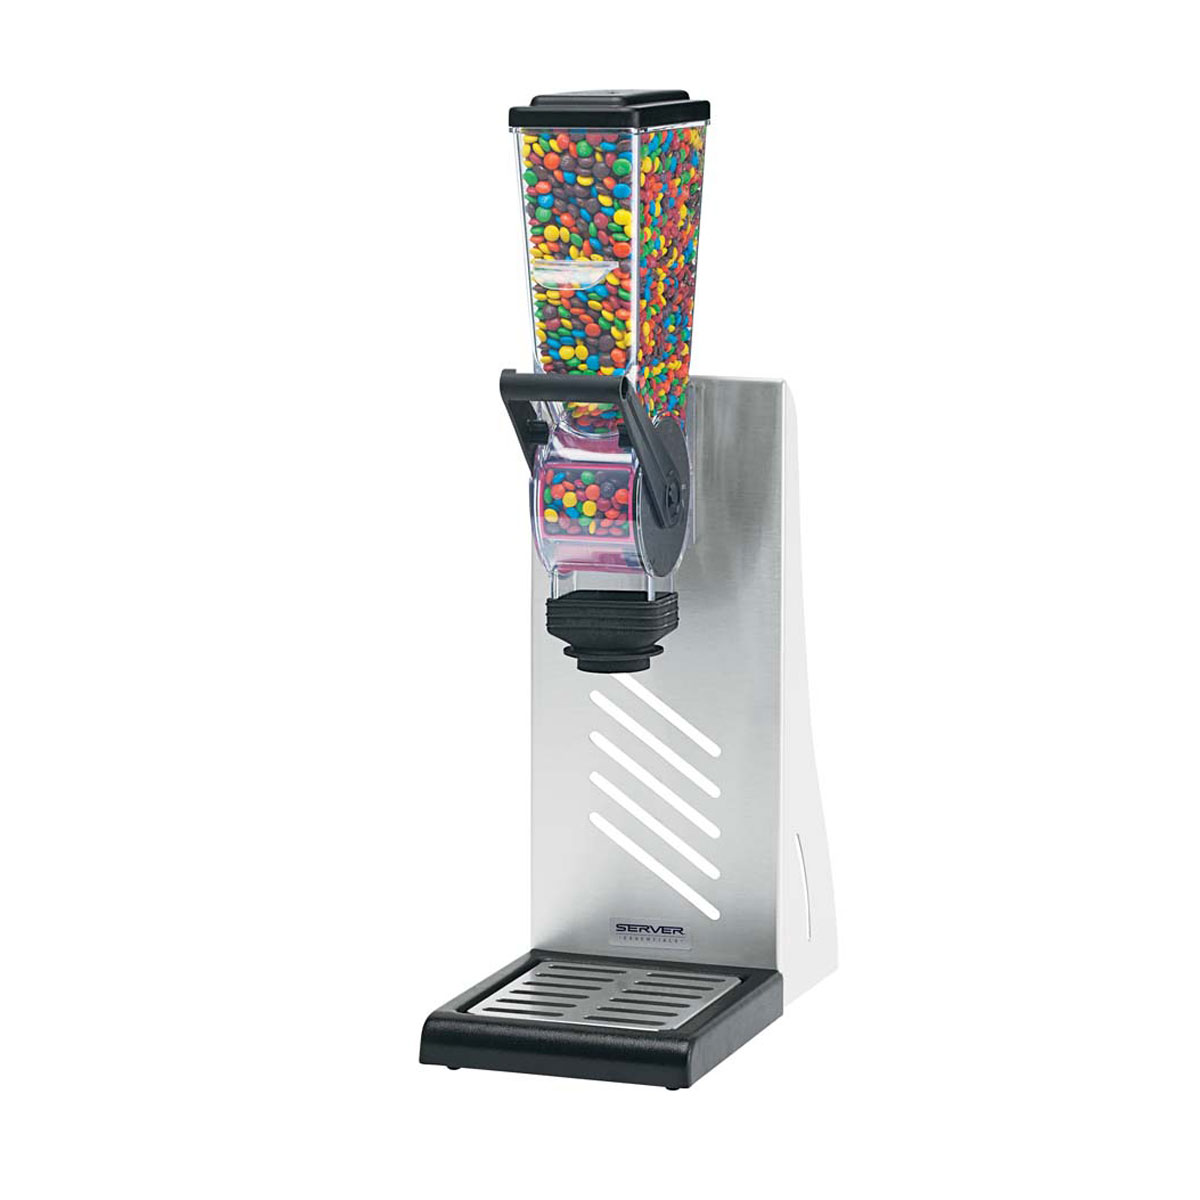 Free Up Counterspace  Single, 2 L Dry Food & Candy Dispenser